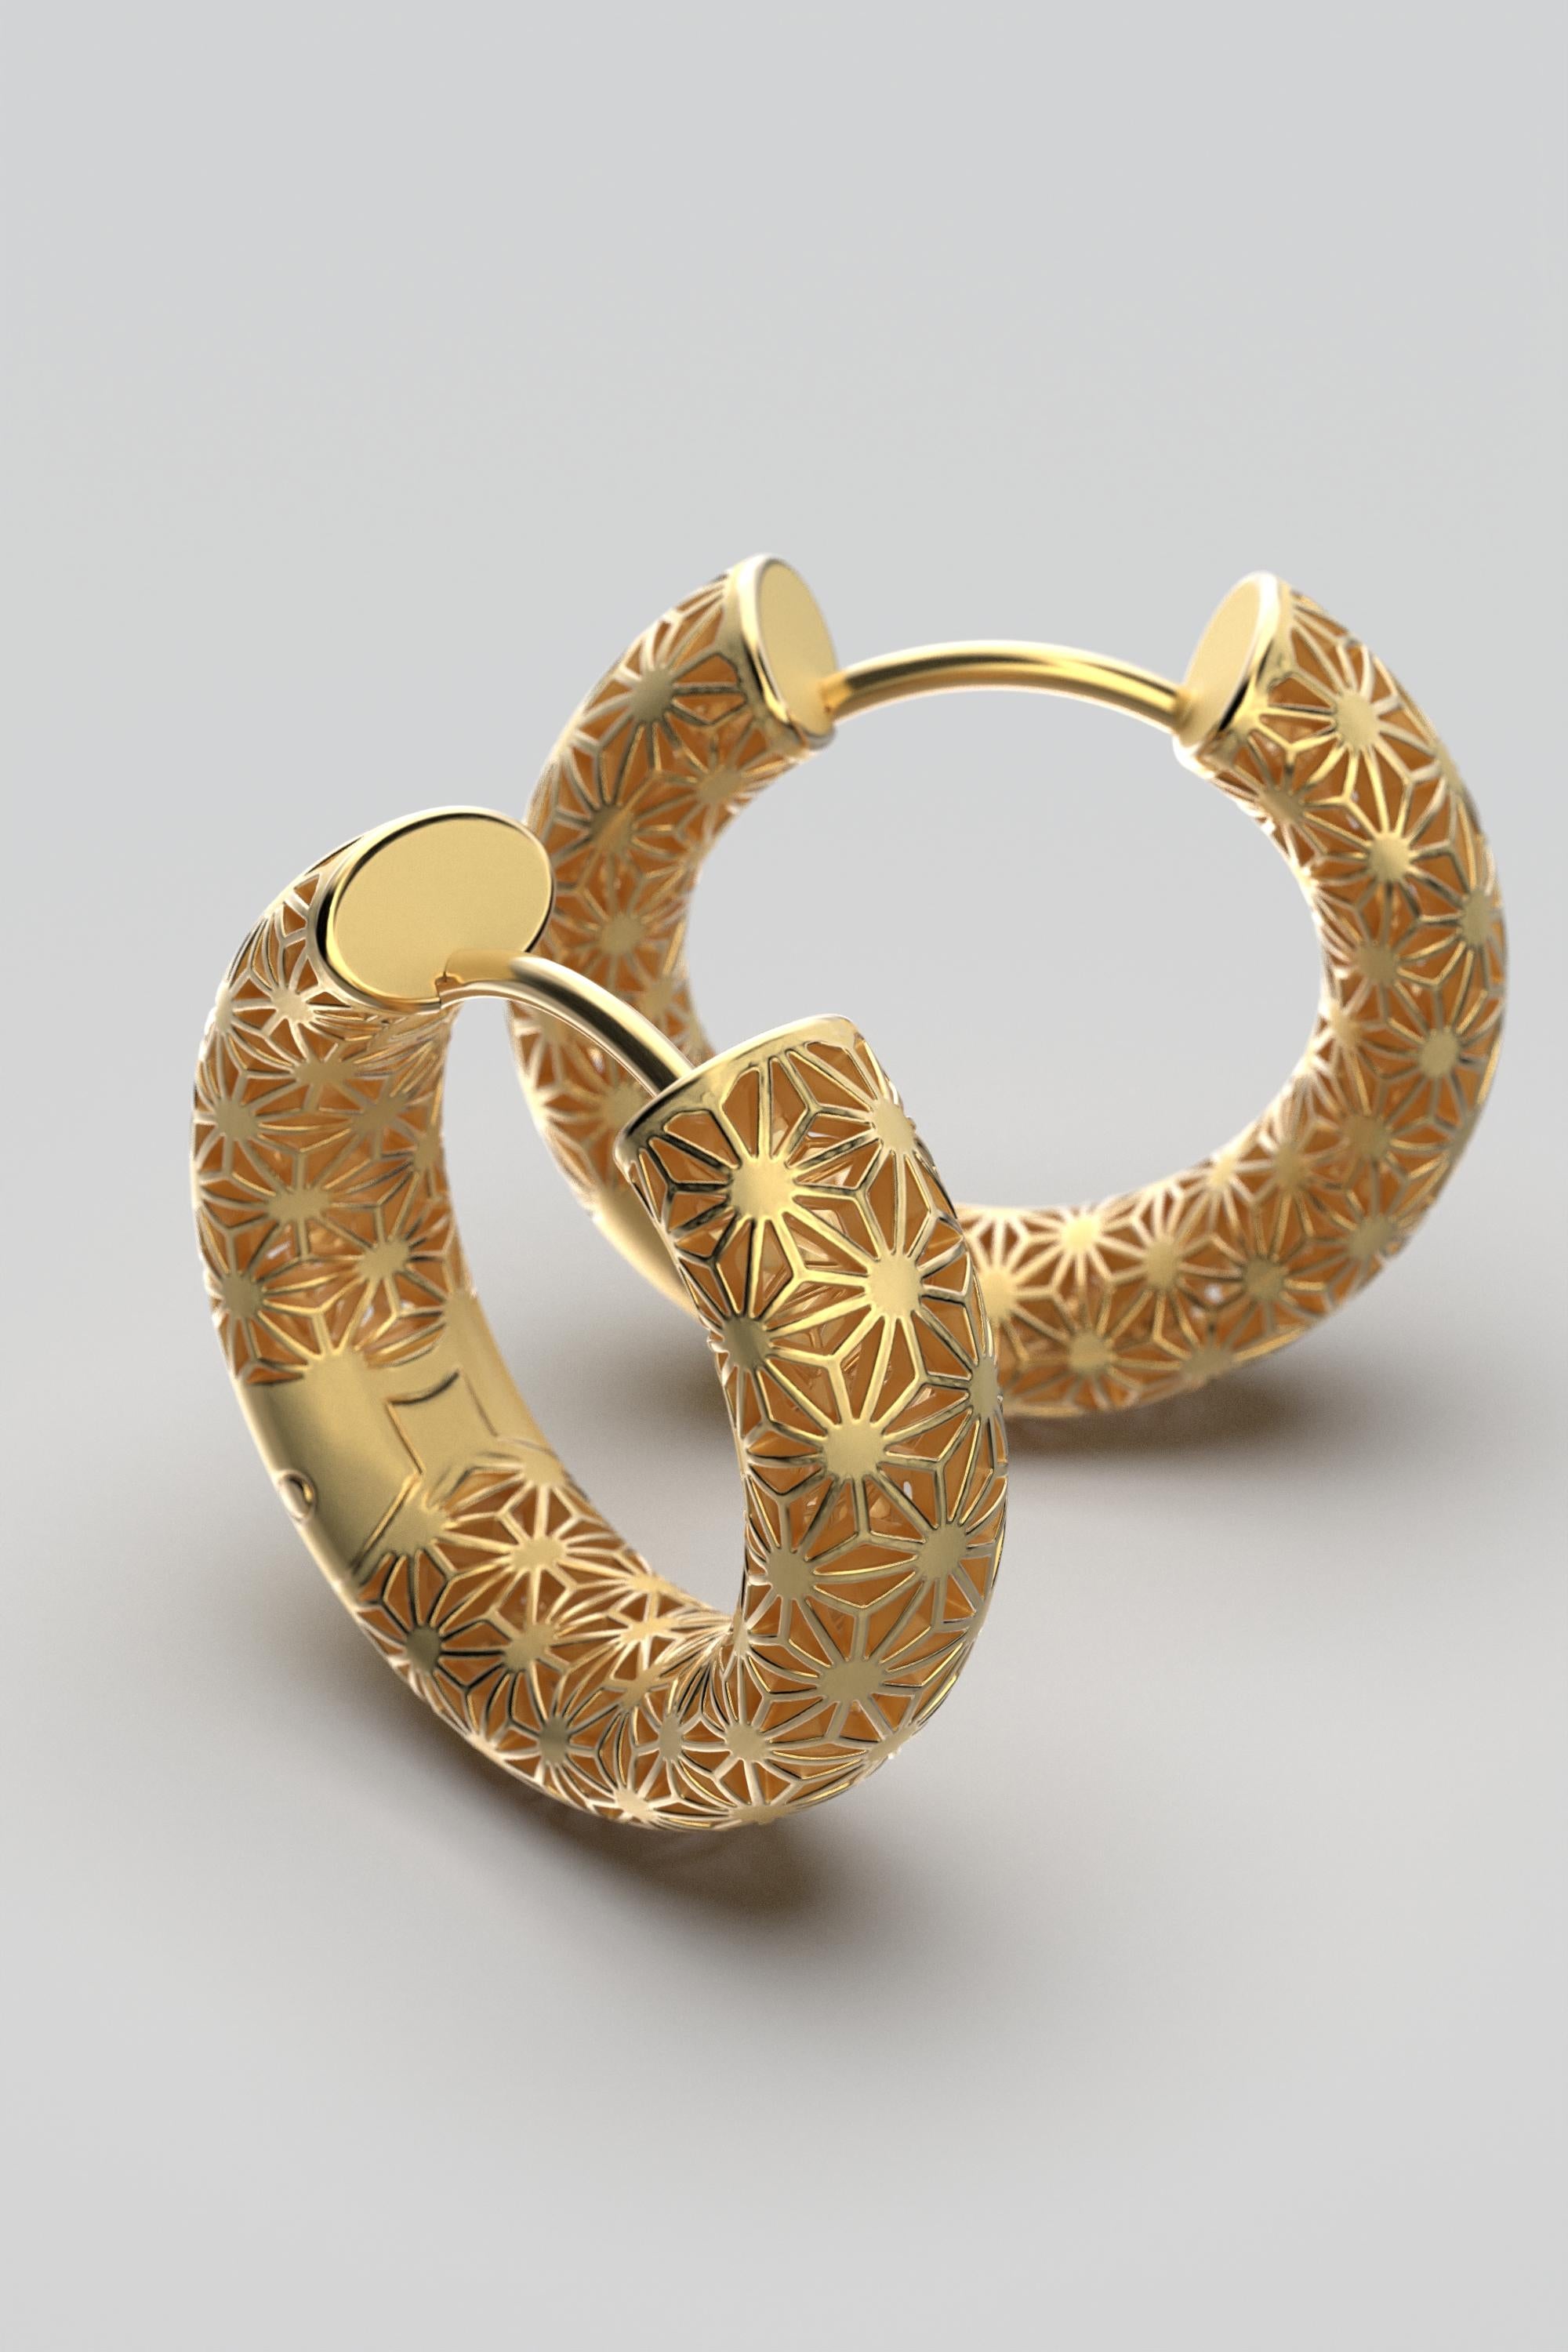  Oltremare Gioielli 14K Italian Gold Hoop Earrings - Sashiko Japanese Pattern  In New Condition For Sale In Camisano Vicentino, VI